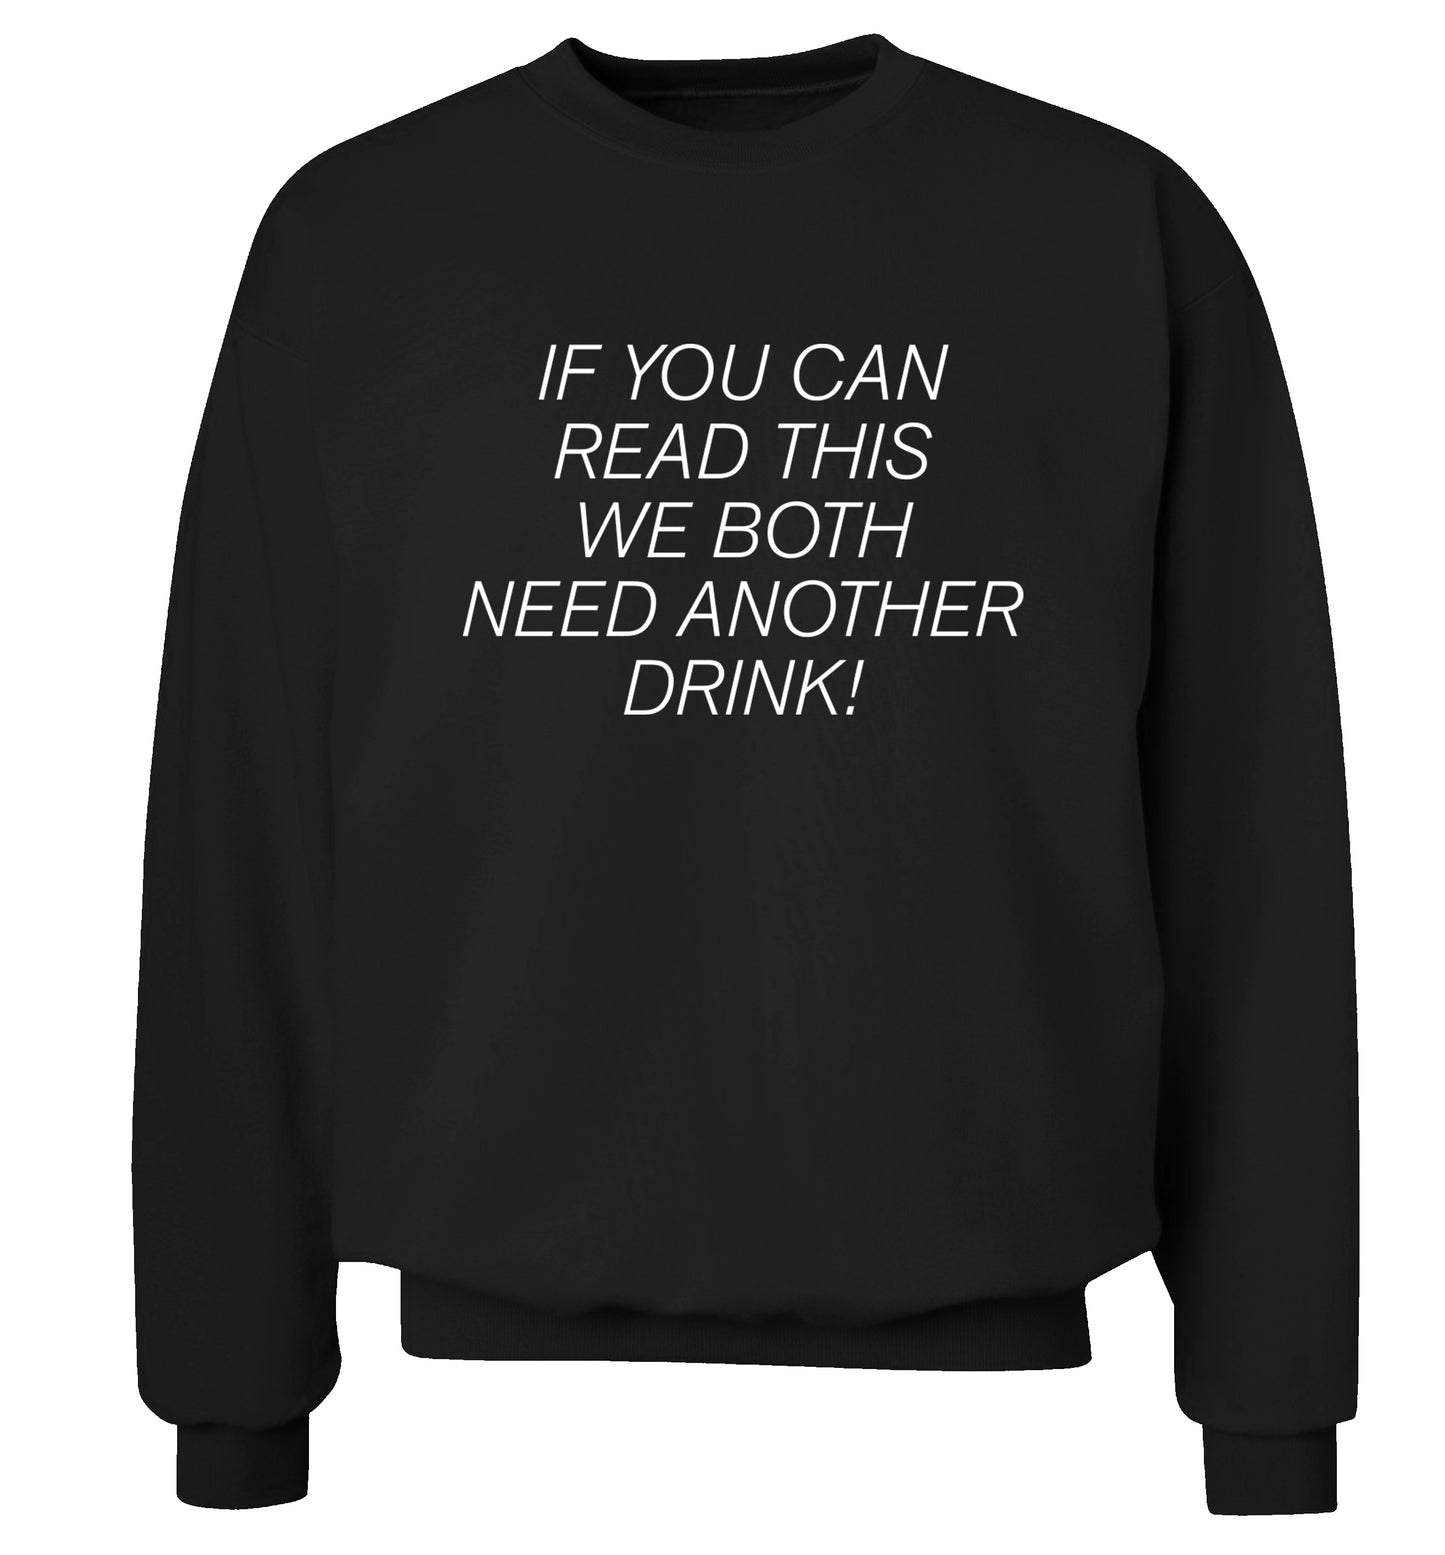 If you can read this we both need another drink! Adult's unisex black Sweater 2XL